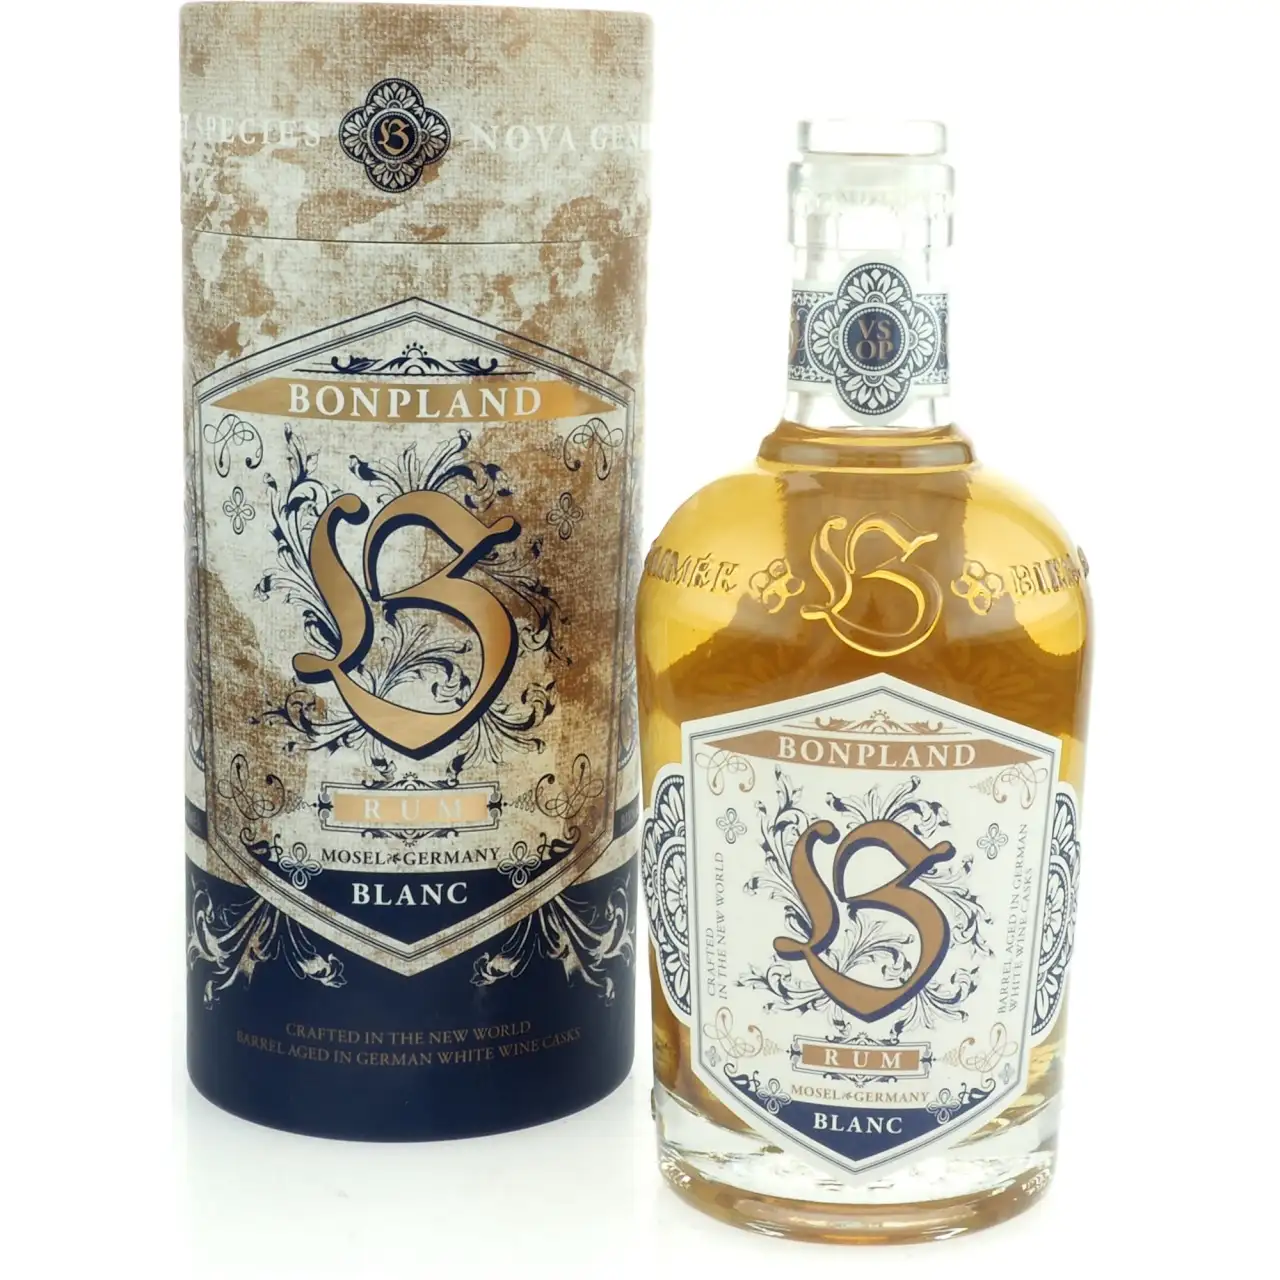 Image of the front of the bottle of the rum Bonpland Blanc VSOP